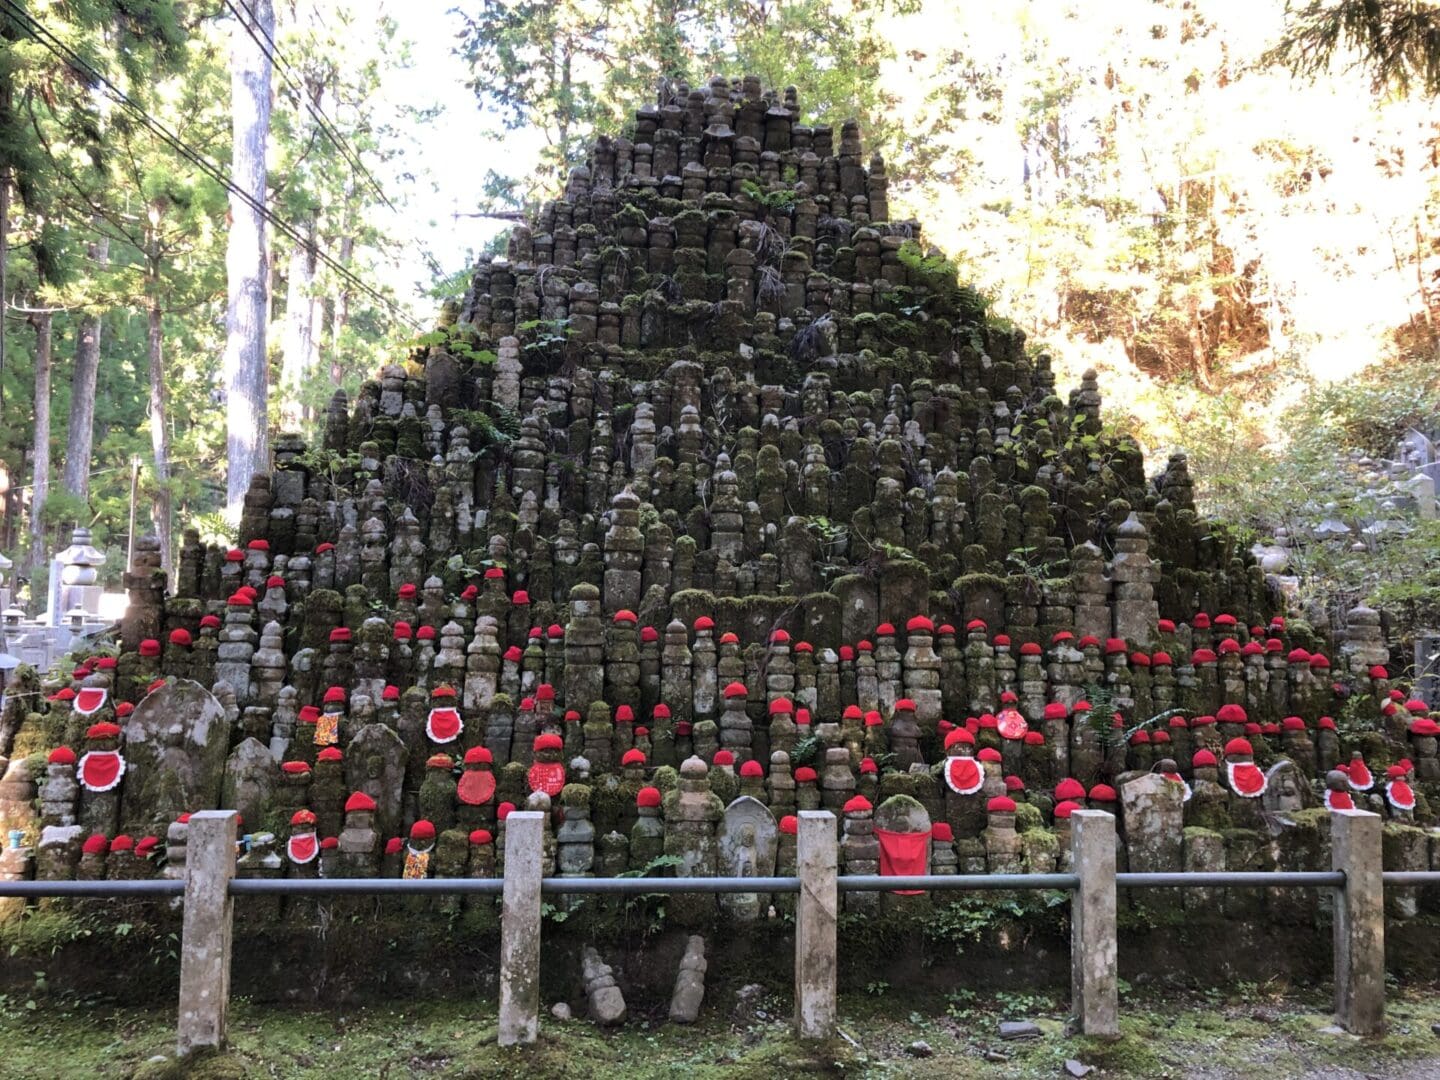 A large pile of rocks with red flowers on top.